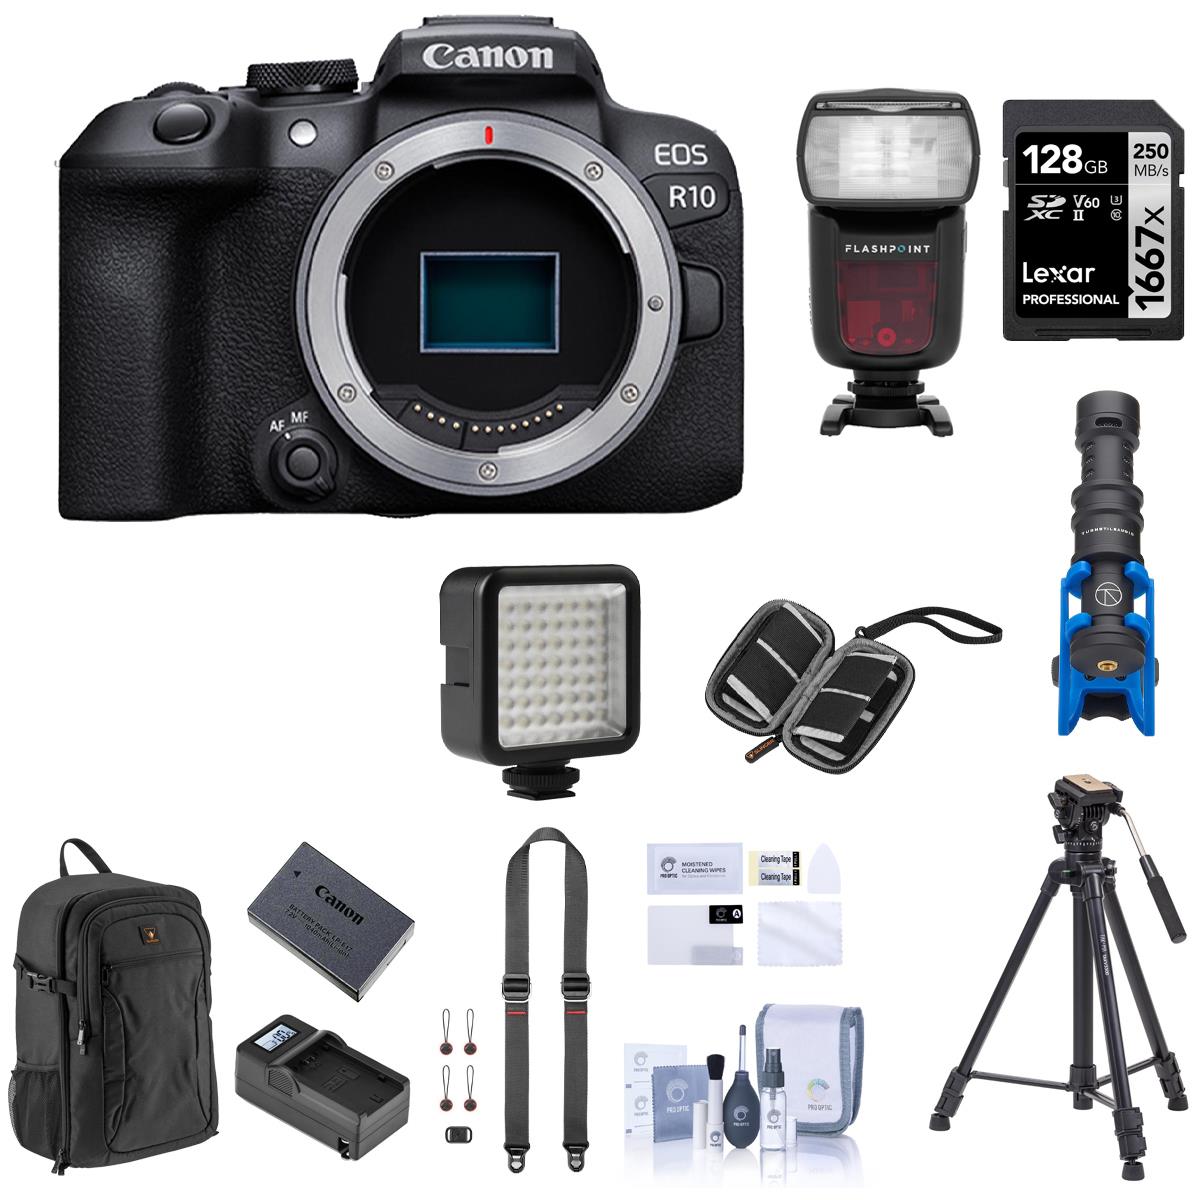 Image of Canon EOS R10 Mirrorless Digital Camera Body with Photography Accessories Kit